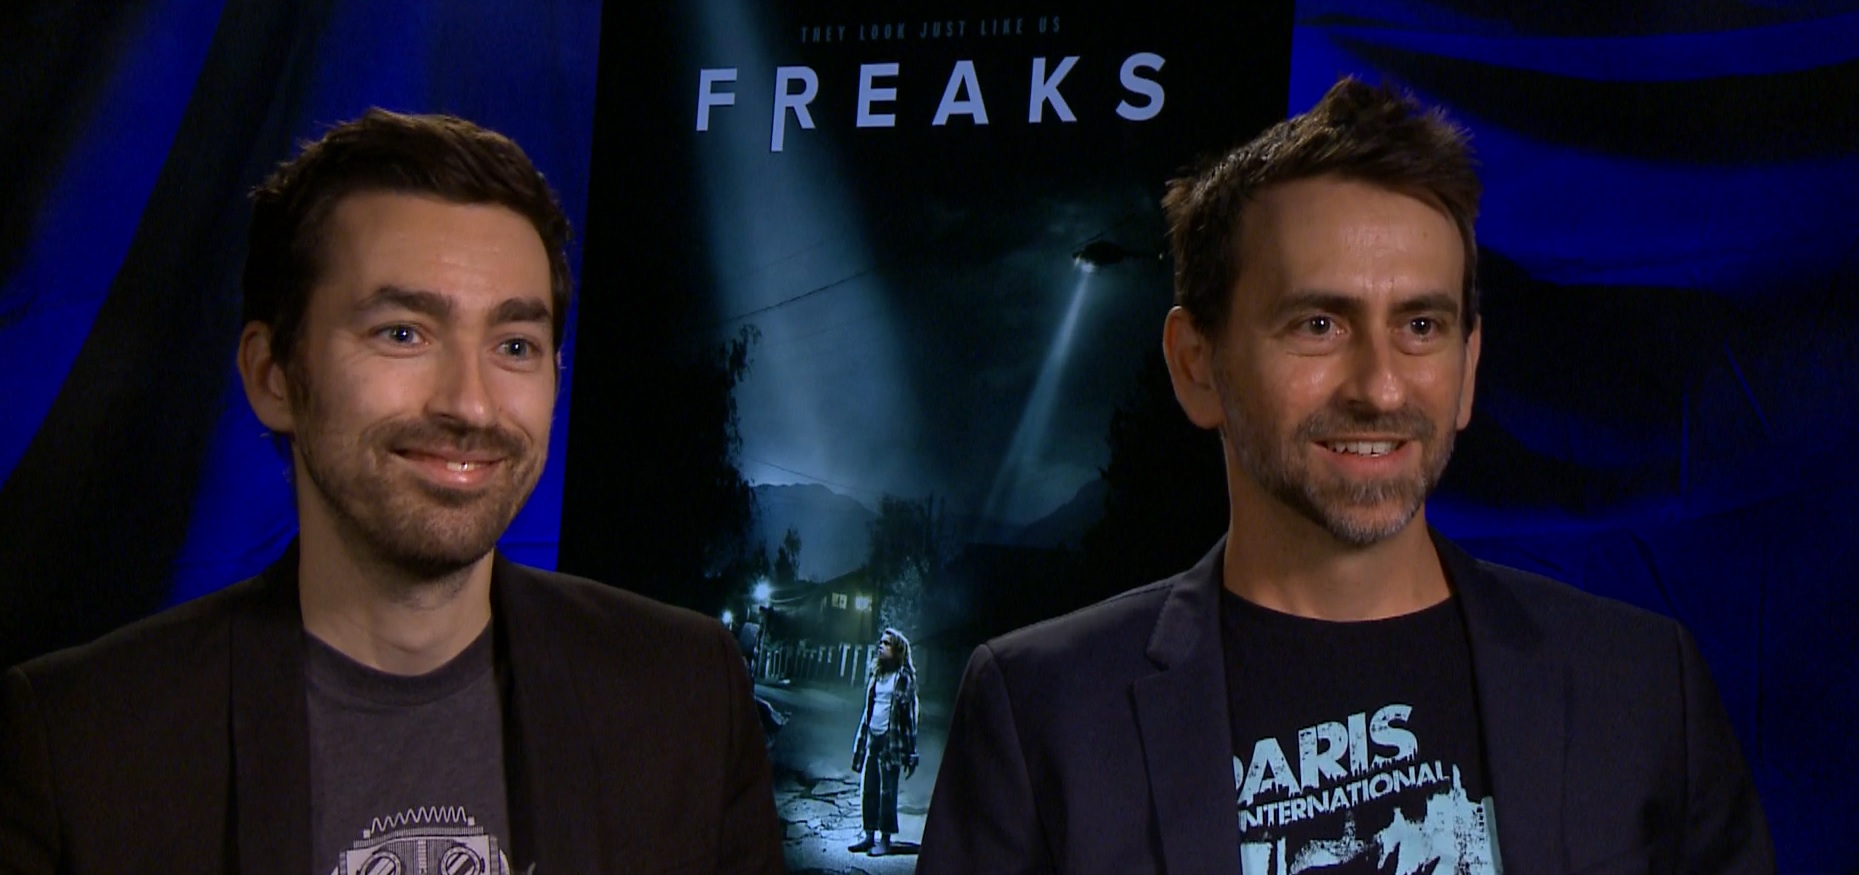 Freaks: Directors Zach Lipovsky and Adam B. Stein On A Suspense With Superpowers [Exclusive Interview]